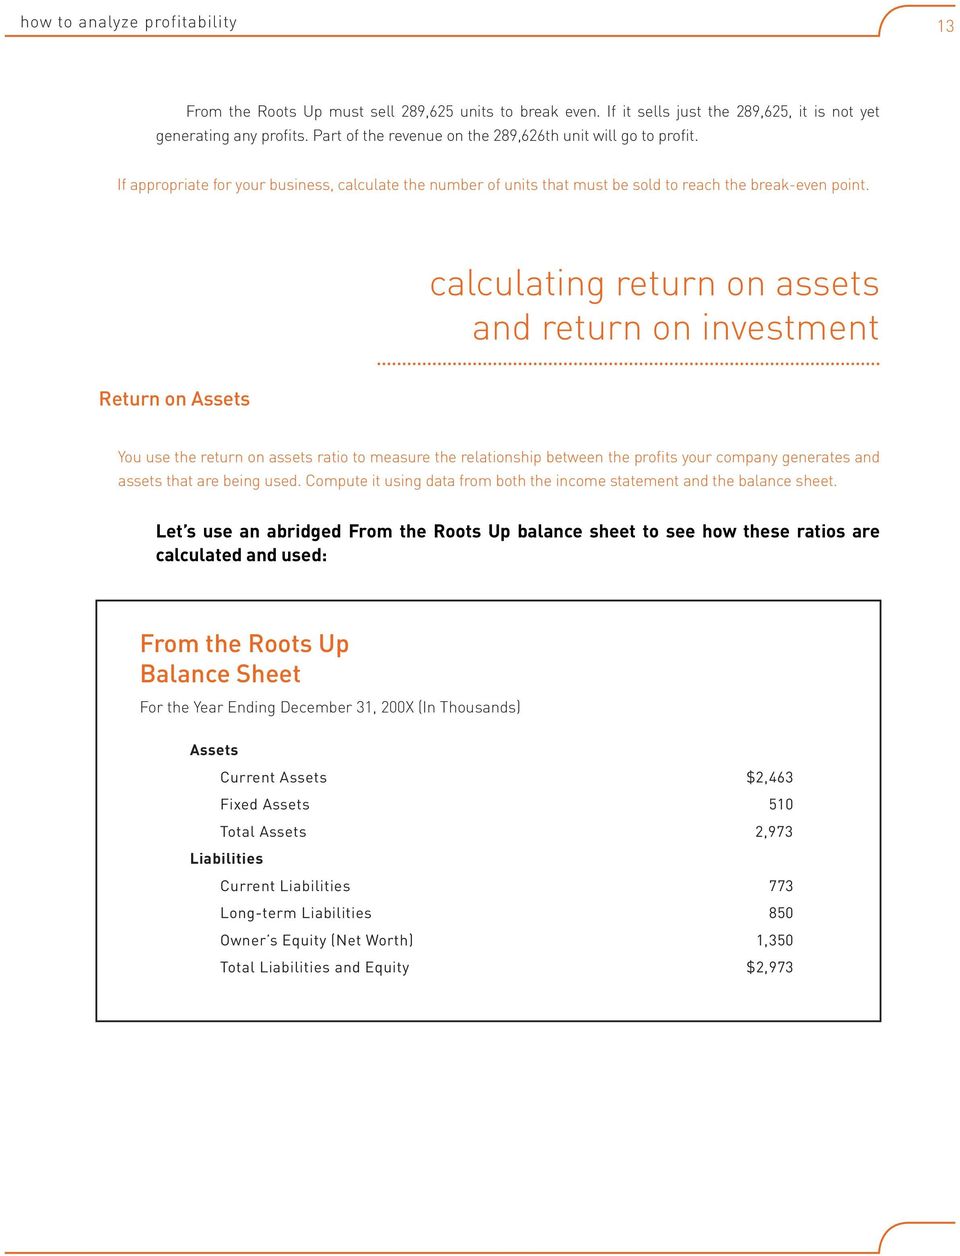 calculating return on assets and return on investment Return on Assets You use the return on assets ratio to measure the relationship between the profits your company generates and assets that are